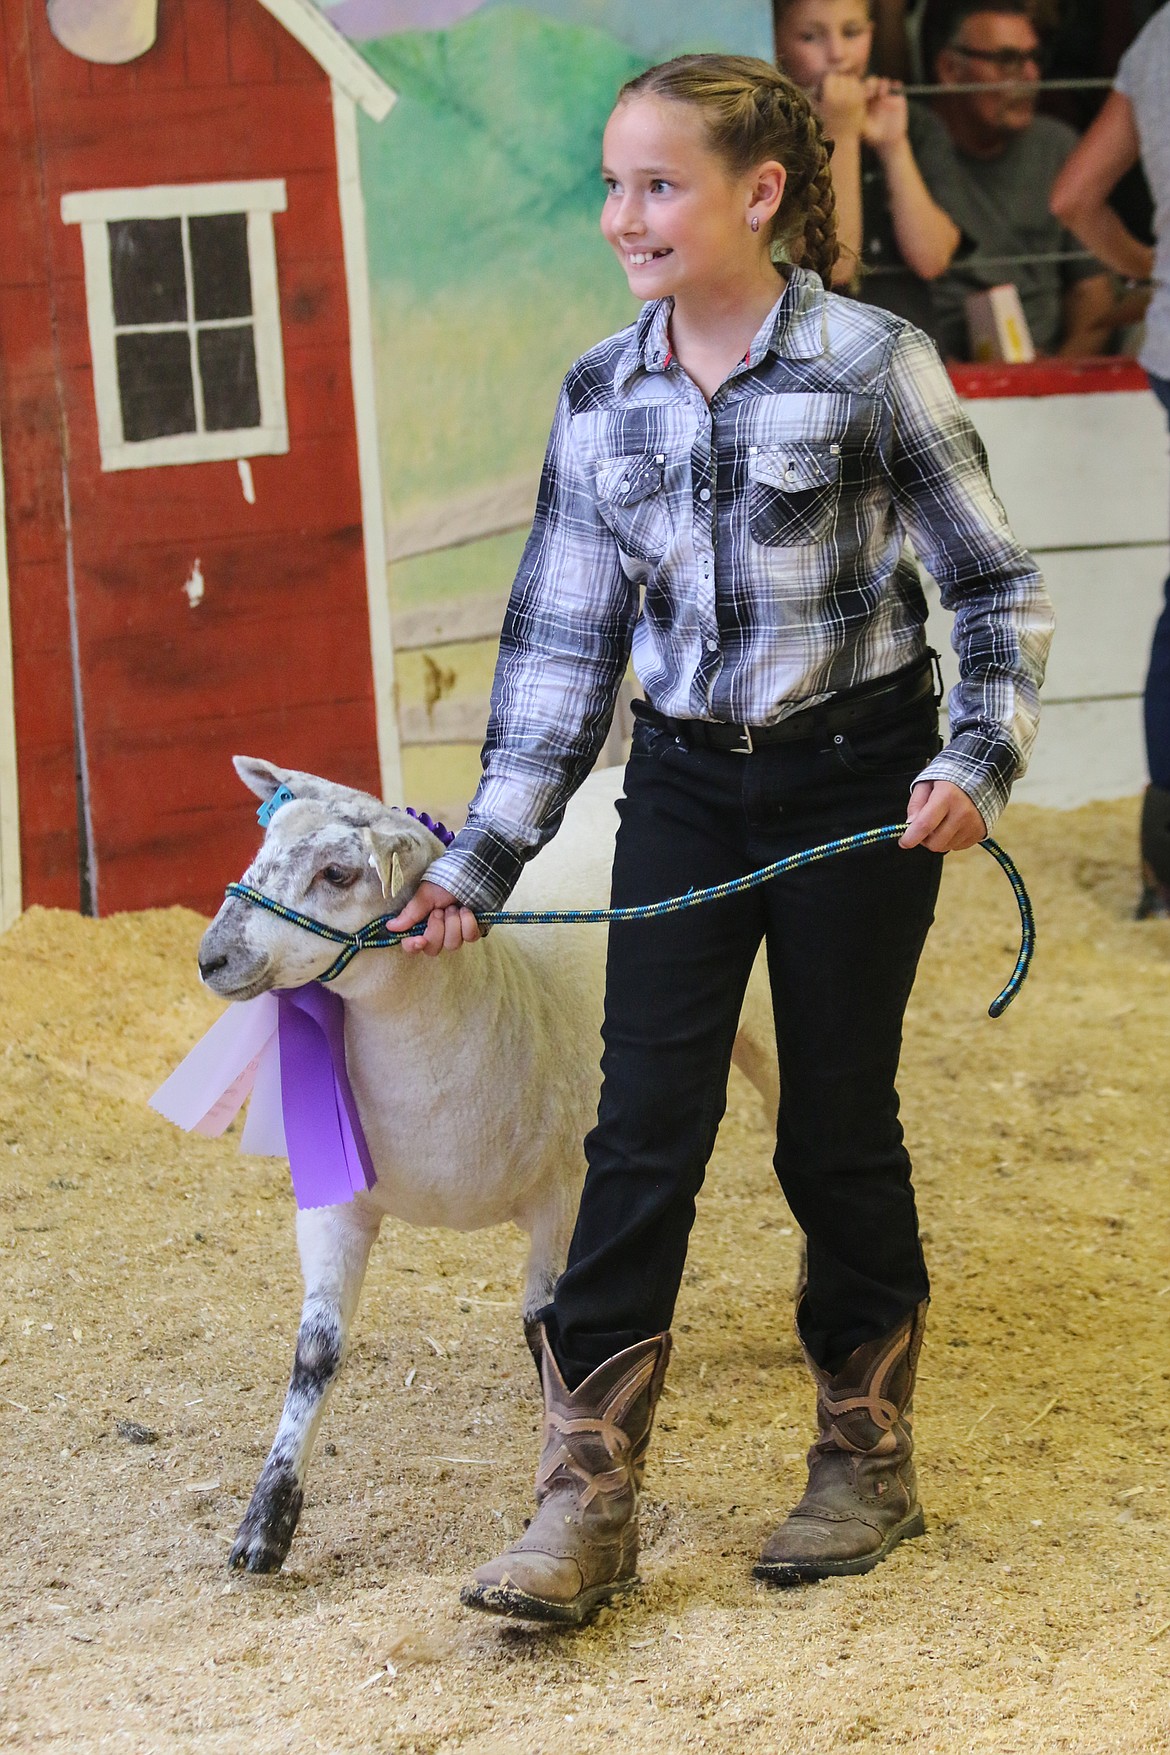 Photo by MANDI BATEMANThe Boundary County 4-H and FFA Animal Sale took place on August 16.